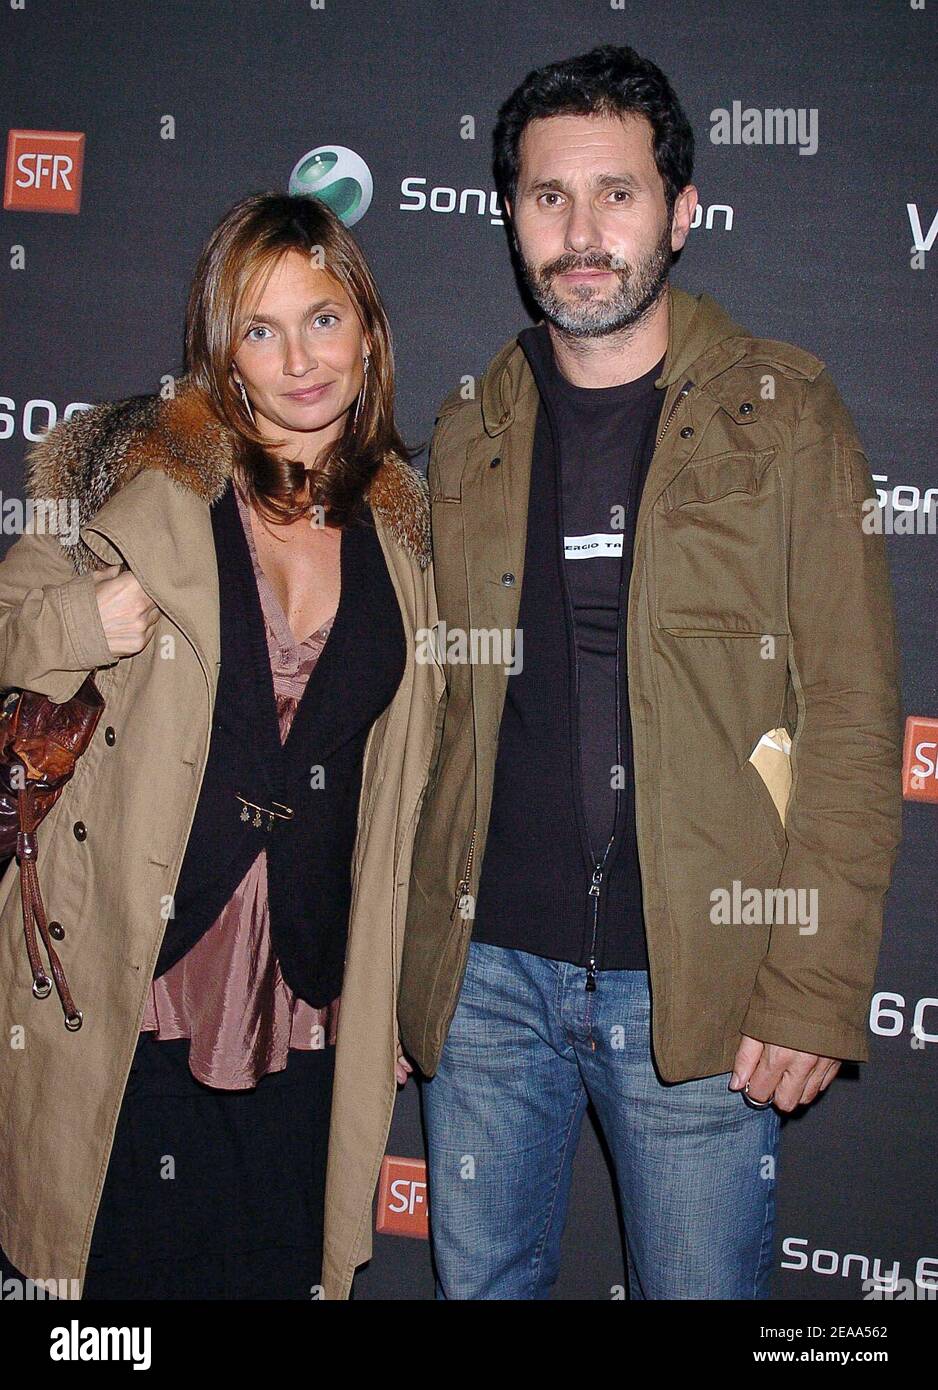 FrenchTV presenter Axelle Laffont and her boyfriend Serge Hazanavicius attend the opening of Danish top model Helena Christensen's photo exhibition, 'An Eye for Beauty', held at the Galerie Diana Marquardt in Paris, France, on October 21, 2005. The pictures have been taken with a Sony Ericsson K750i mobile phone. Photo by Bruno Klein/ABACAPRESS.COM. Stock Photo